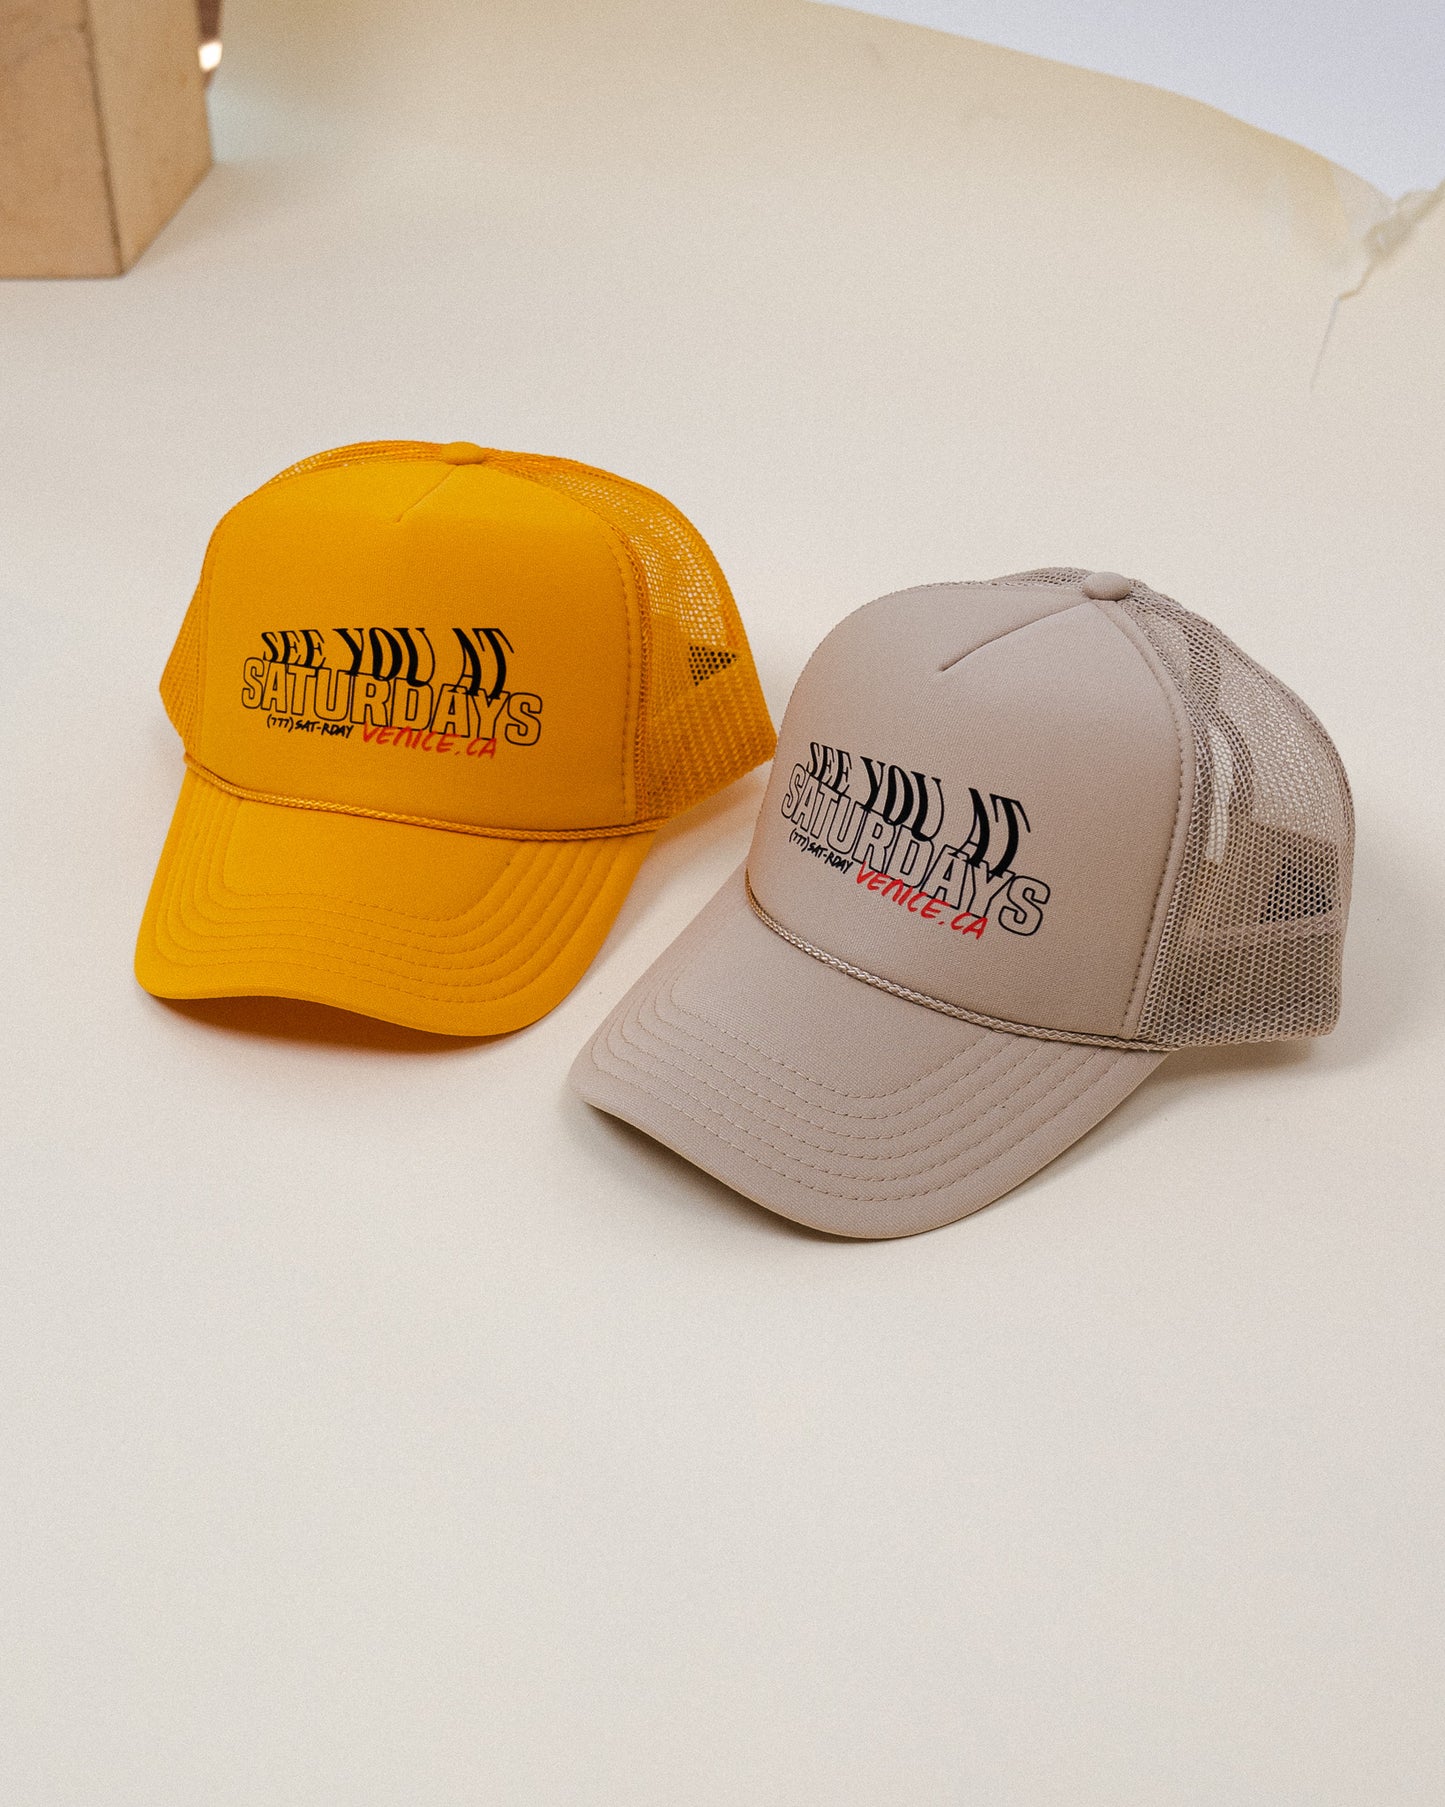 See you at Saturdays Trucker Hat